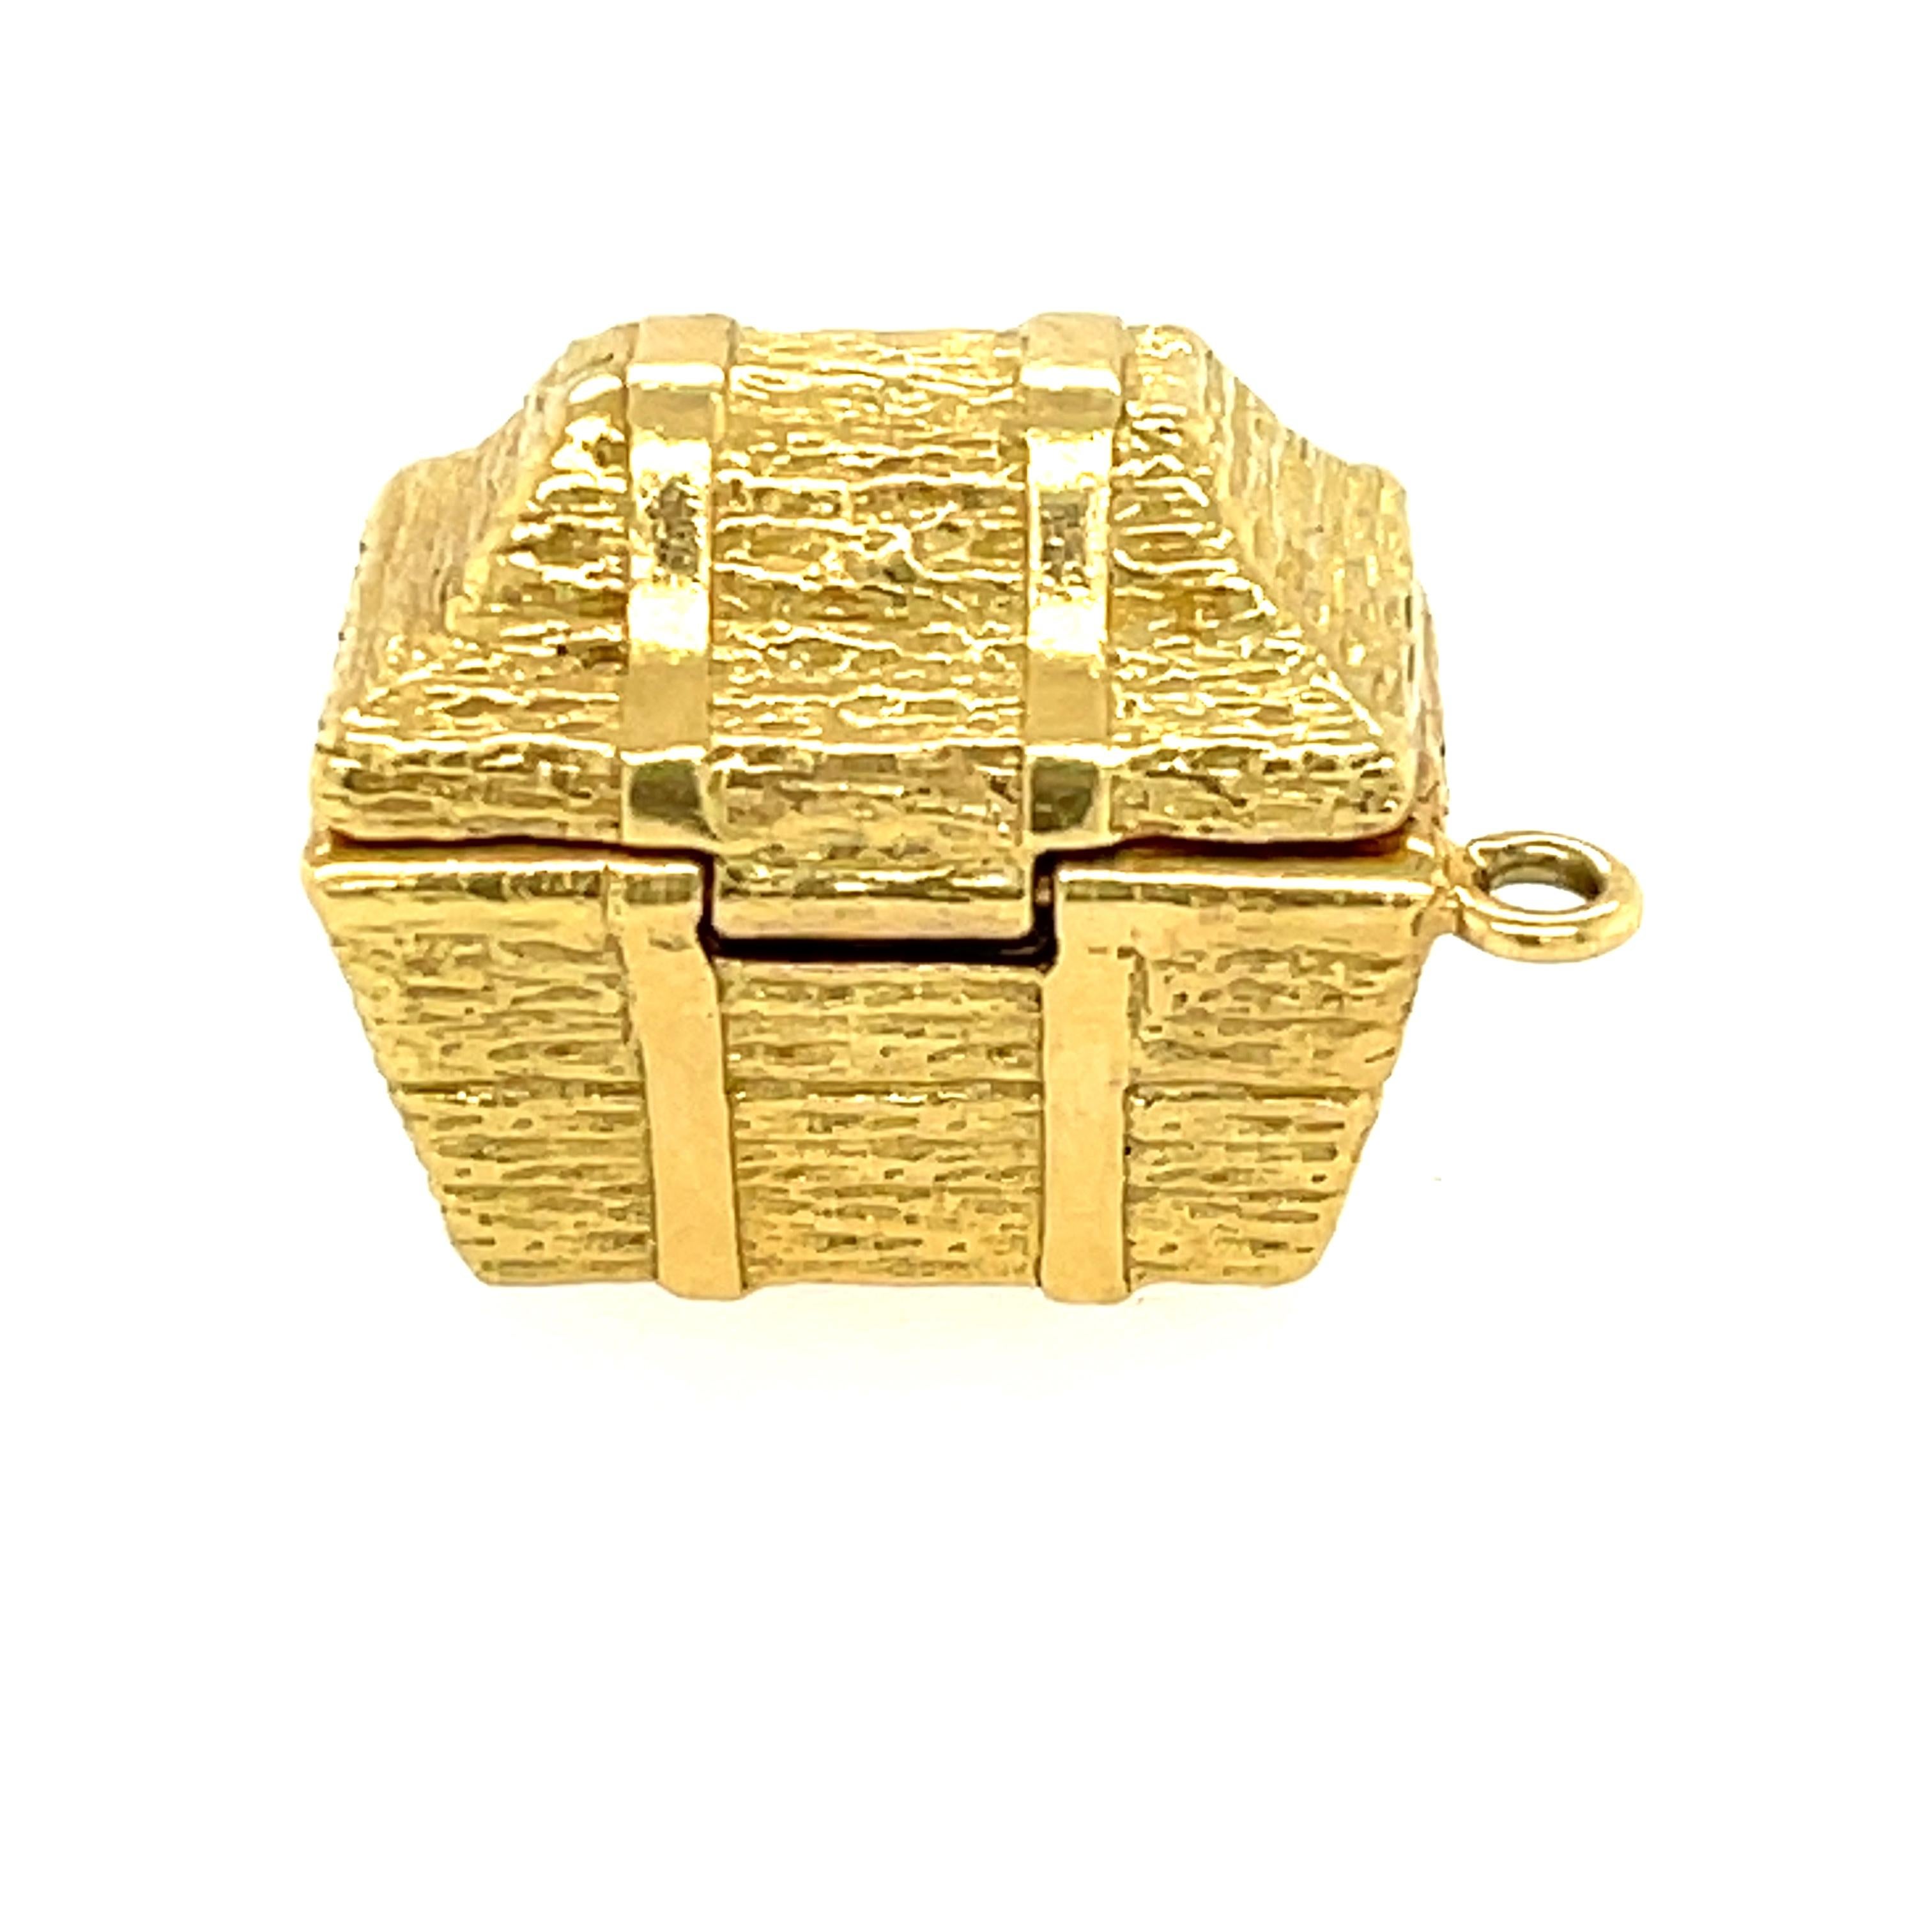 A charming vintage treasure chest charm that hinges open to reveal two colored sapphires and a diamond by Tiffany & Co. This charm was likely made in the 1990s. The charm has a nice heft to it, and has a clever hinge that opens. The charm looks like